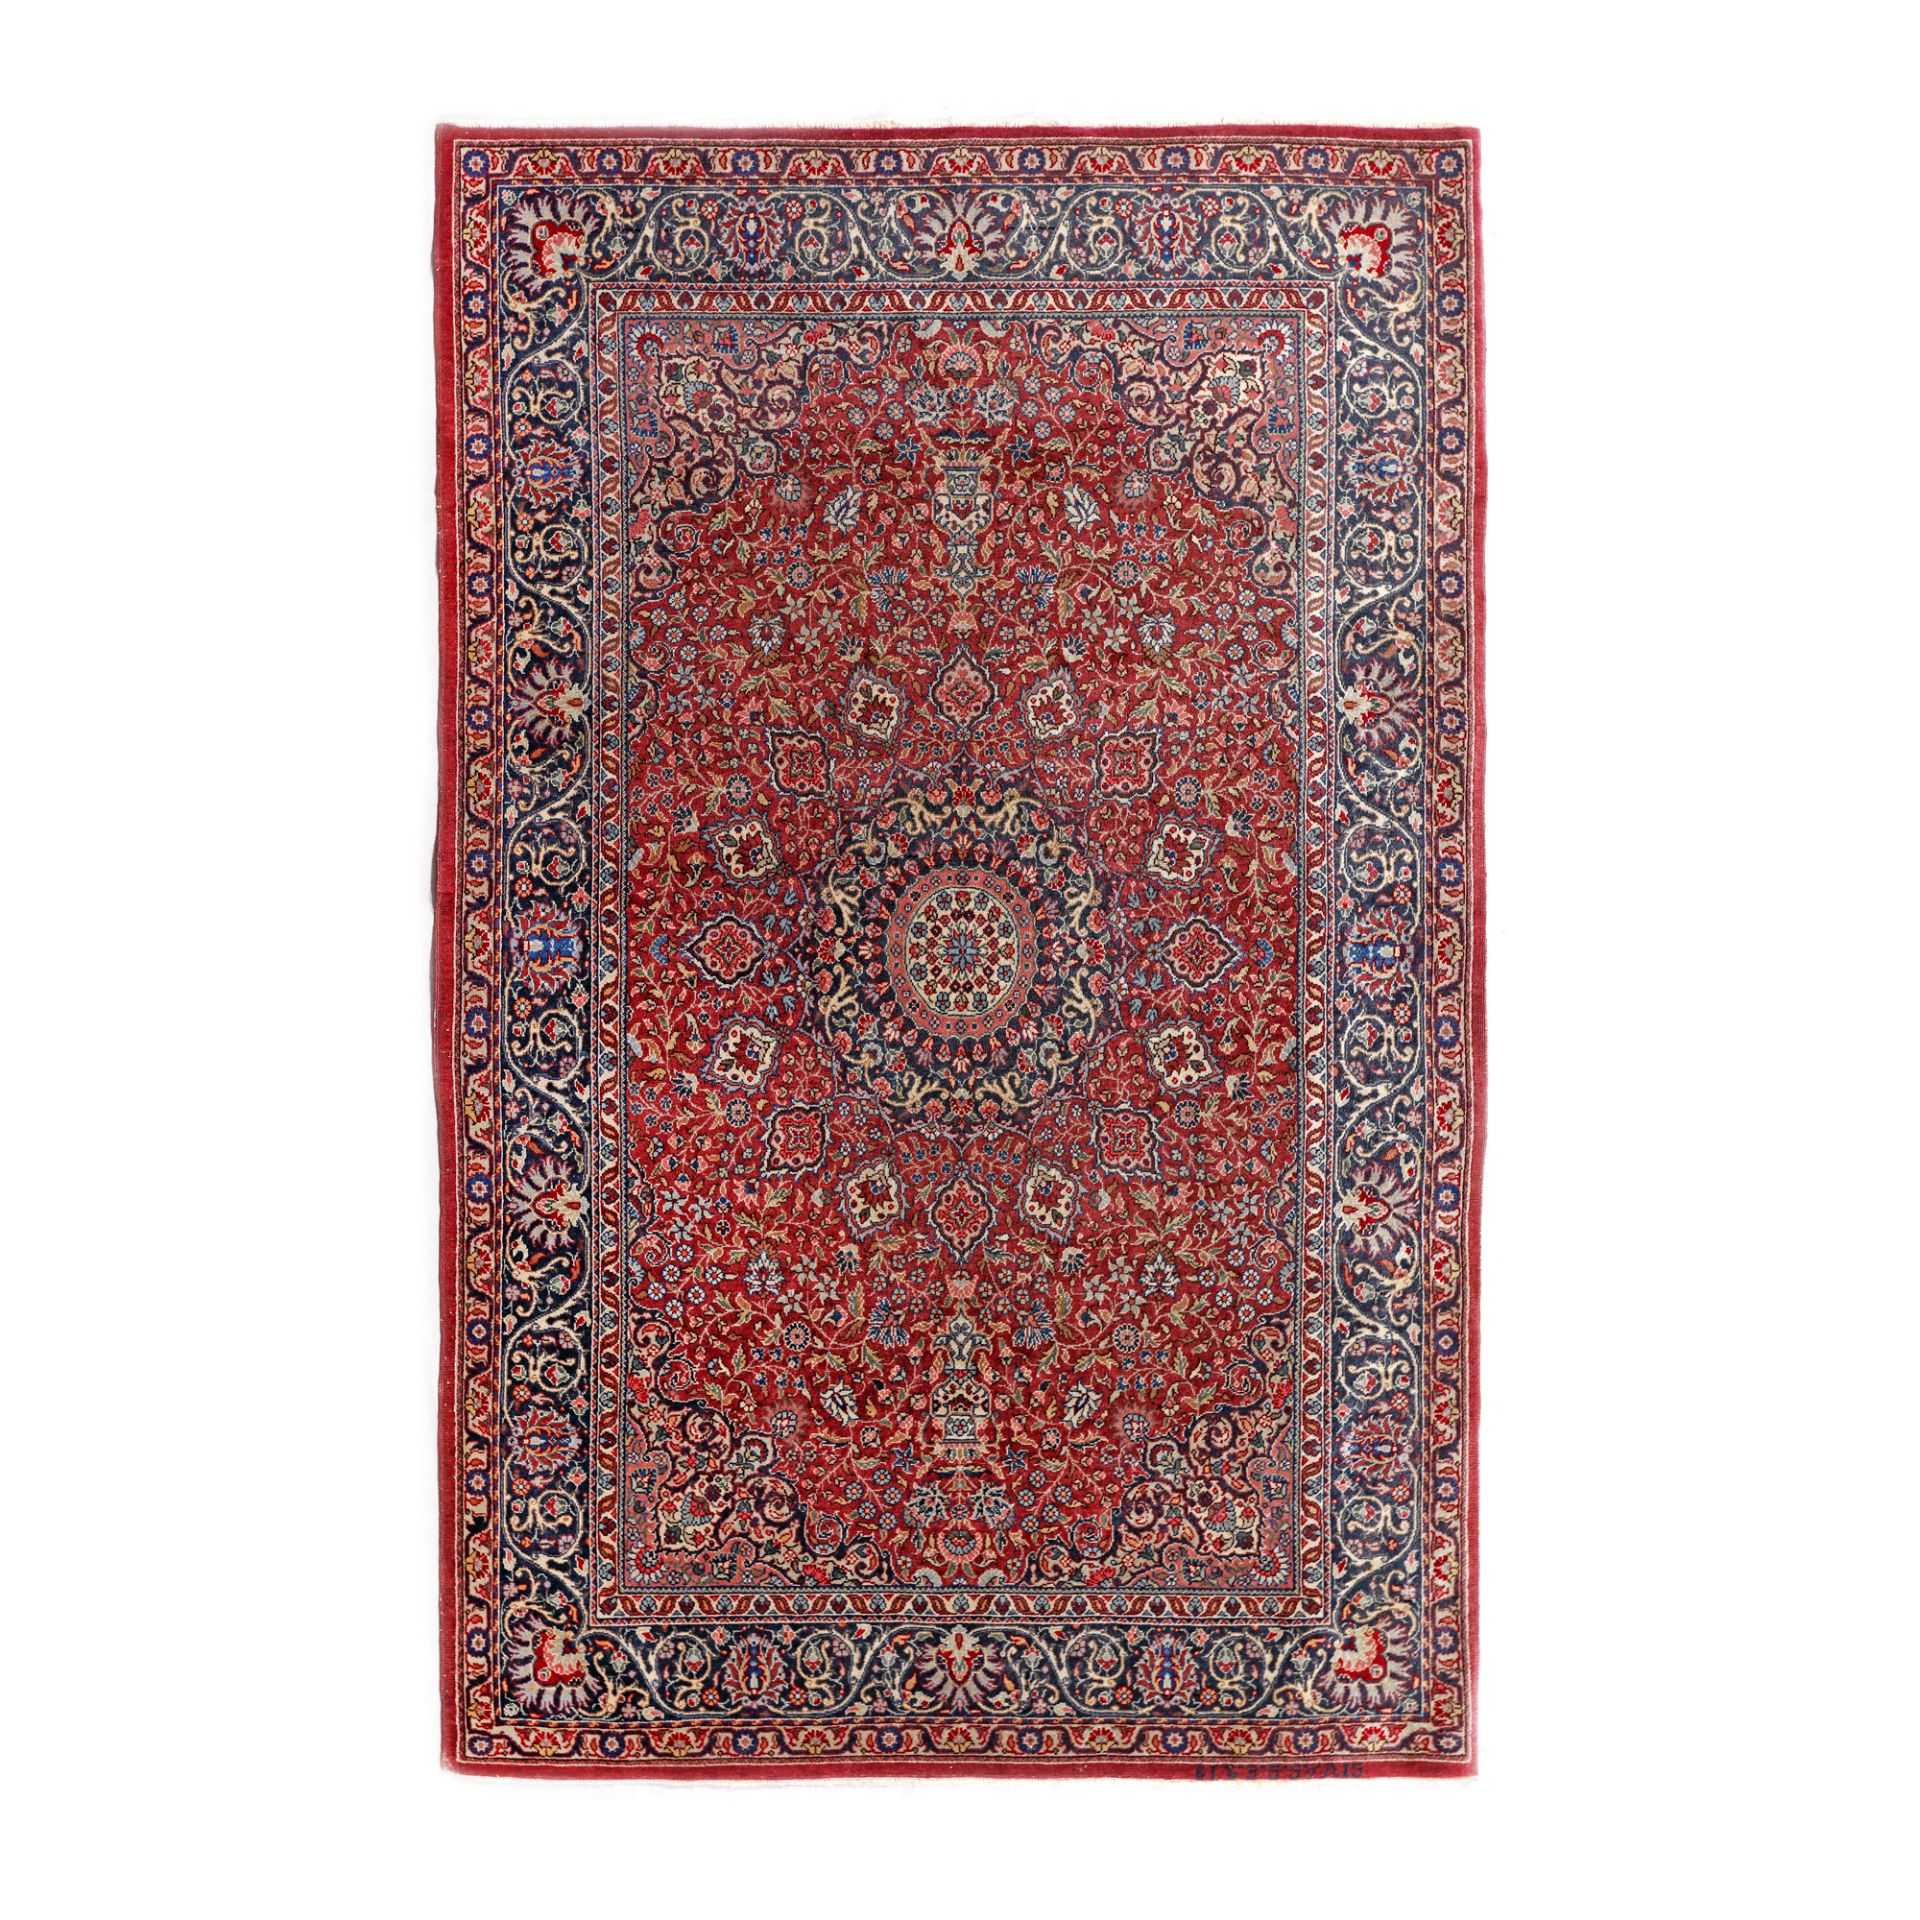 Tabriz wool rug, decorated with medallions and floral motifs specific to the area, approx. 1950